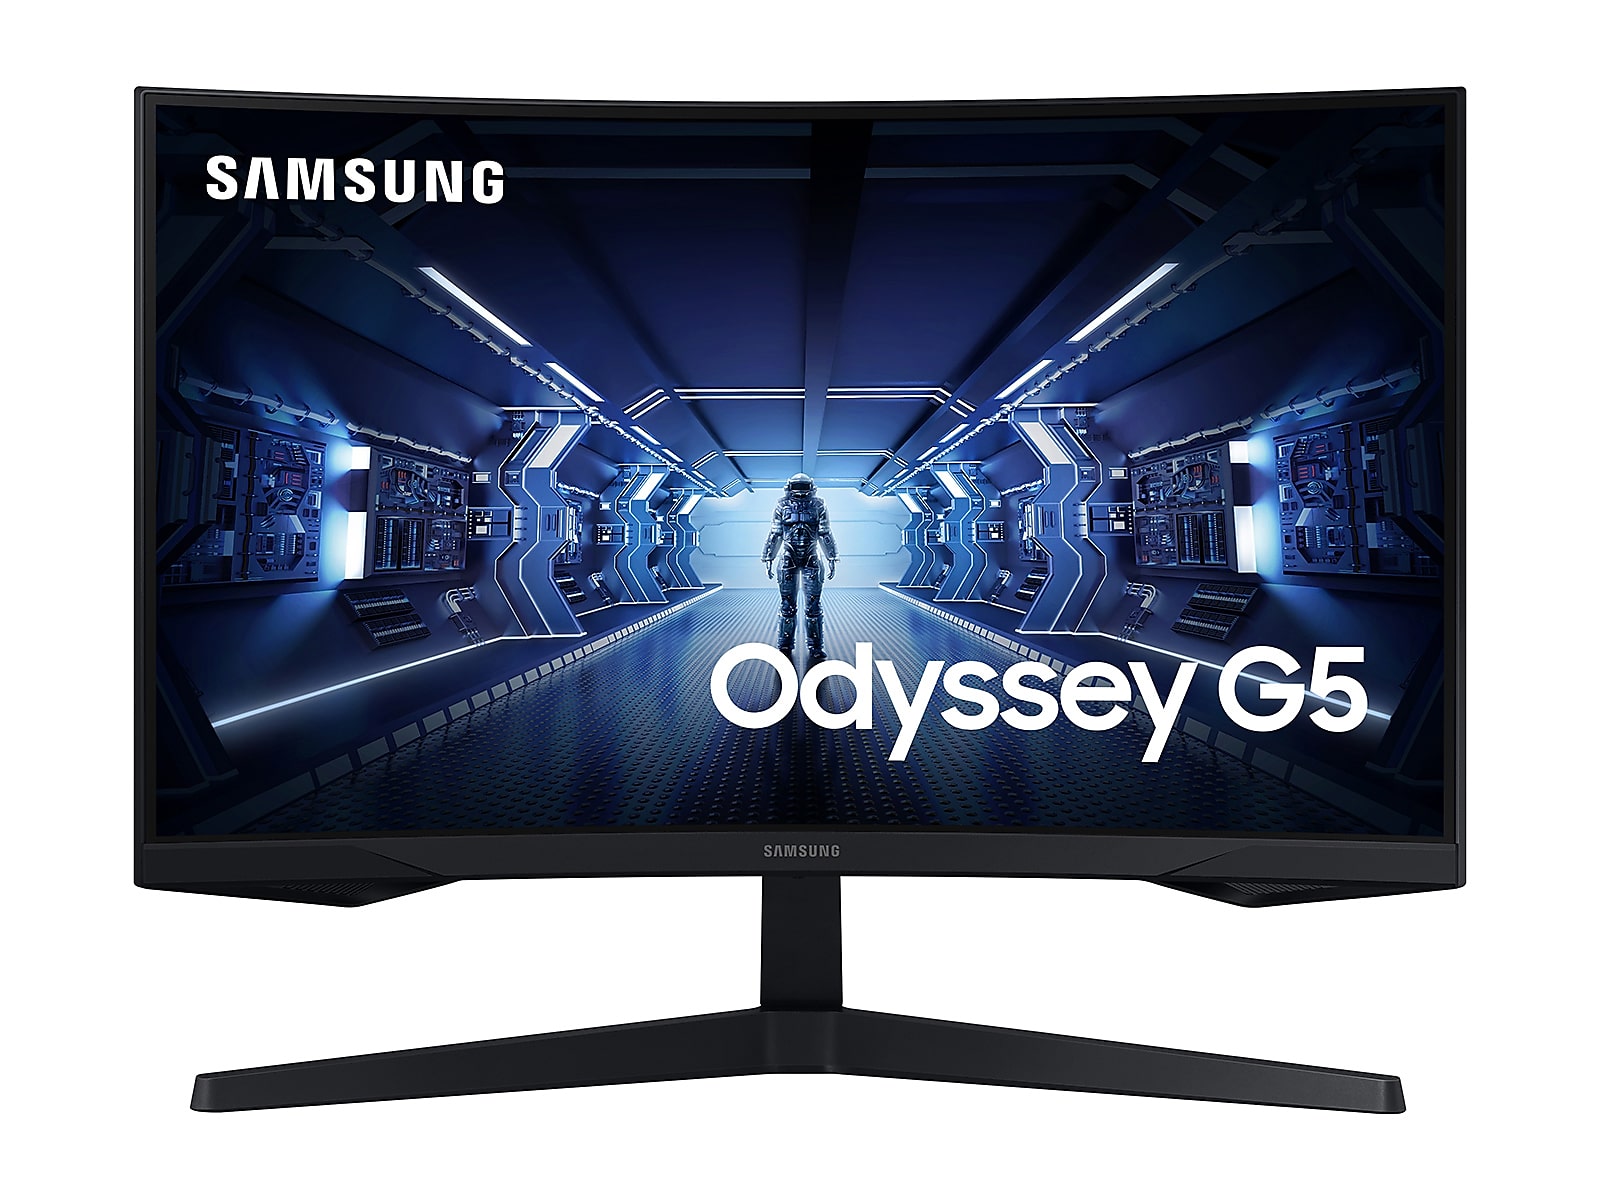 Samsung 34" G5 Odyssey Gaming Monitor with 1000R Curved Screen in Black(LC34G55TWWNXZA)